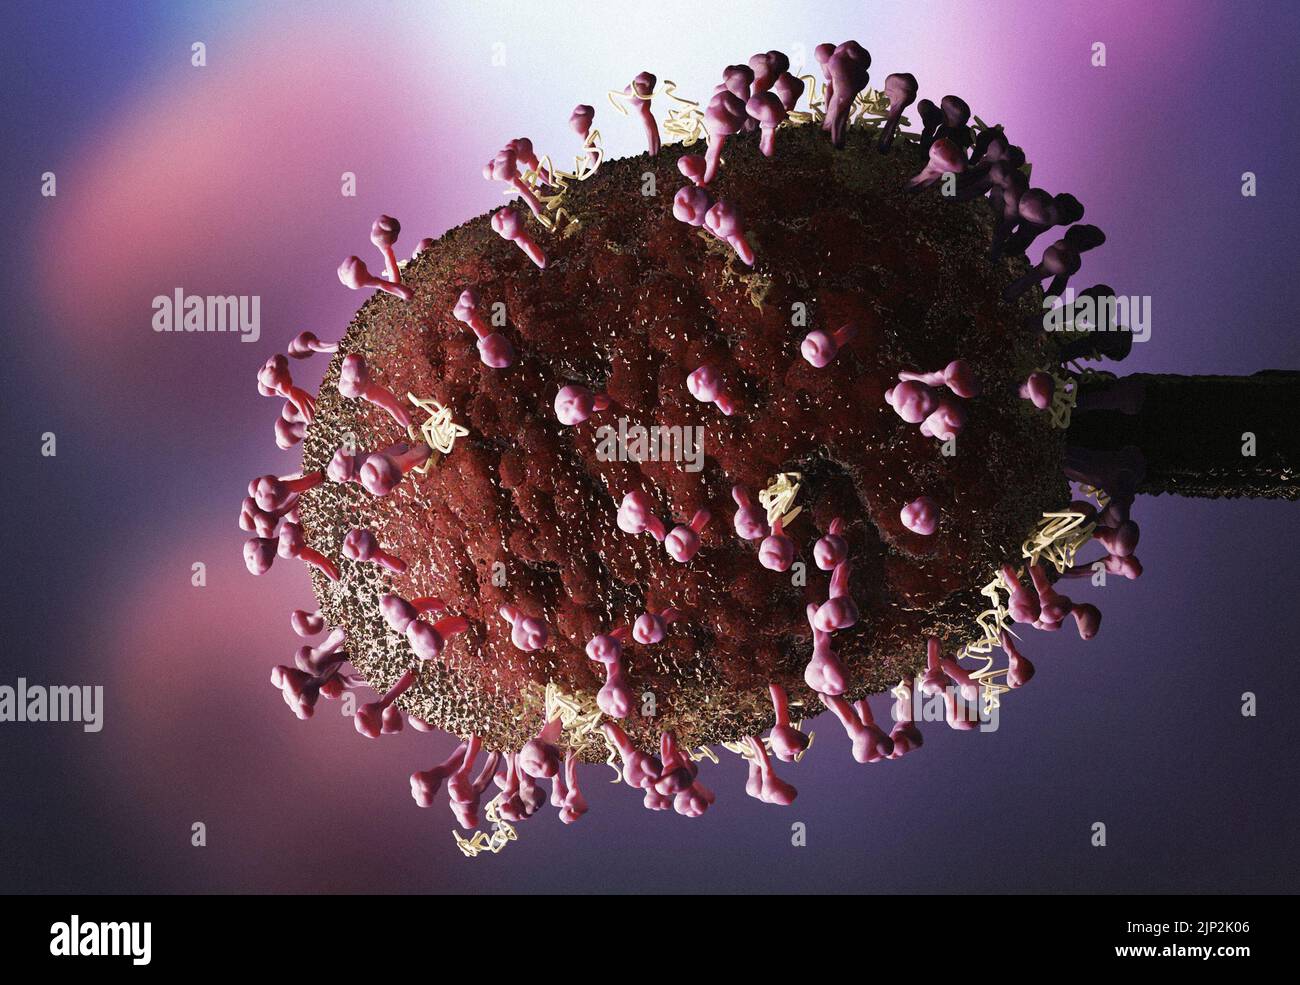 New Langya henipavirus from China in microscopic details showing the pathogen structure and infected cells, artistic reconstruction. Stock Photo